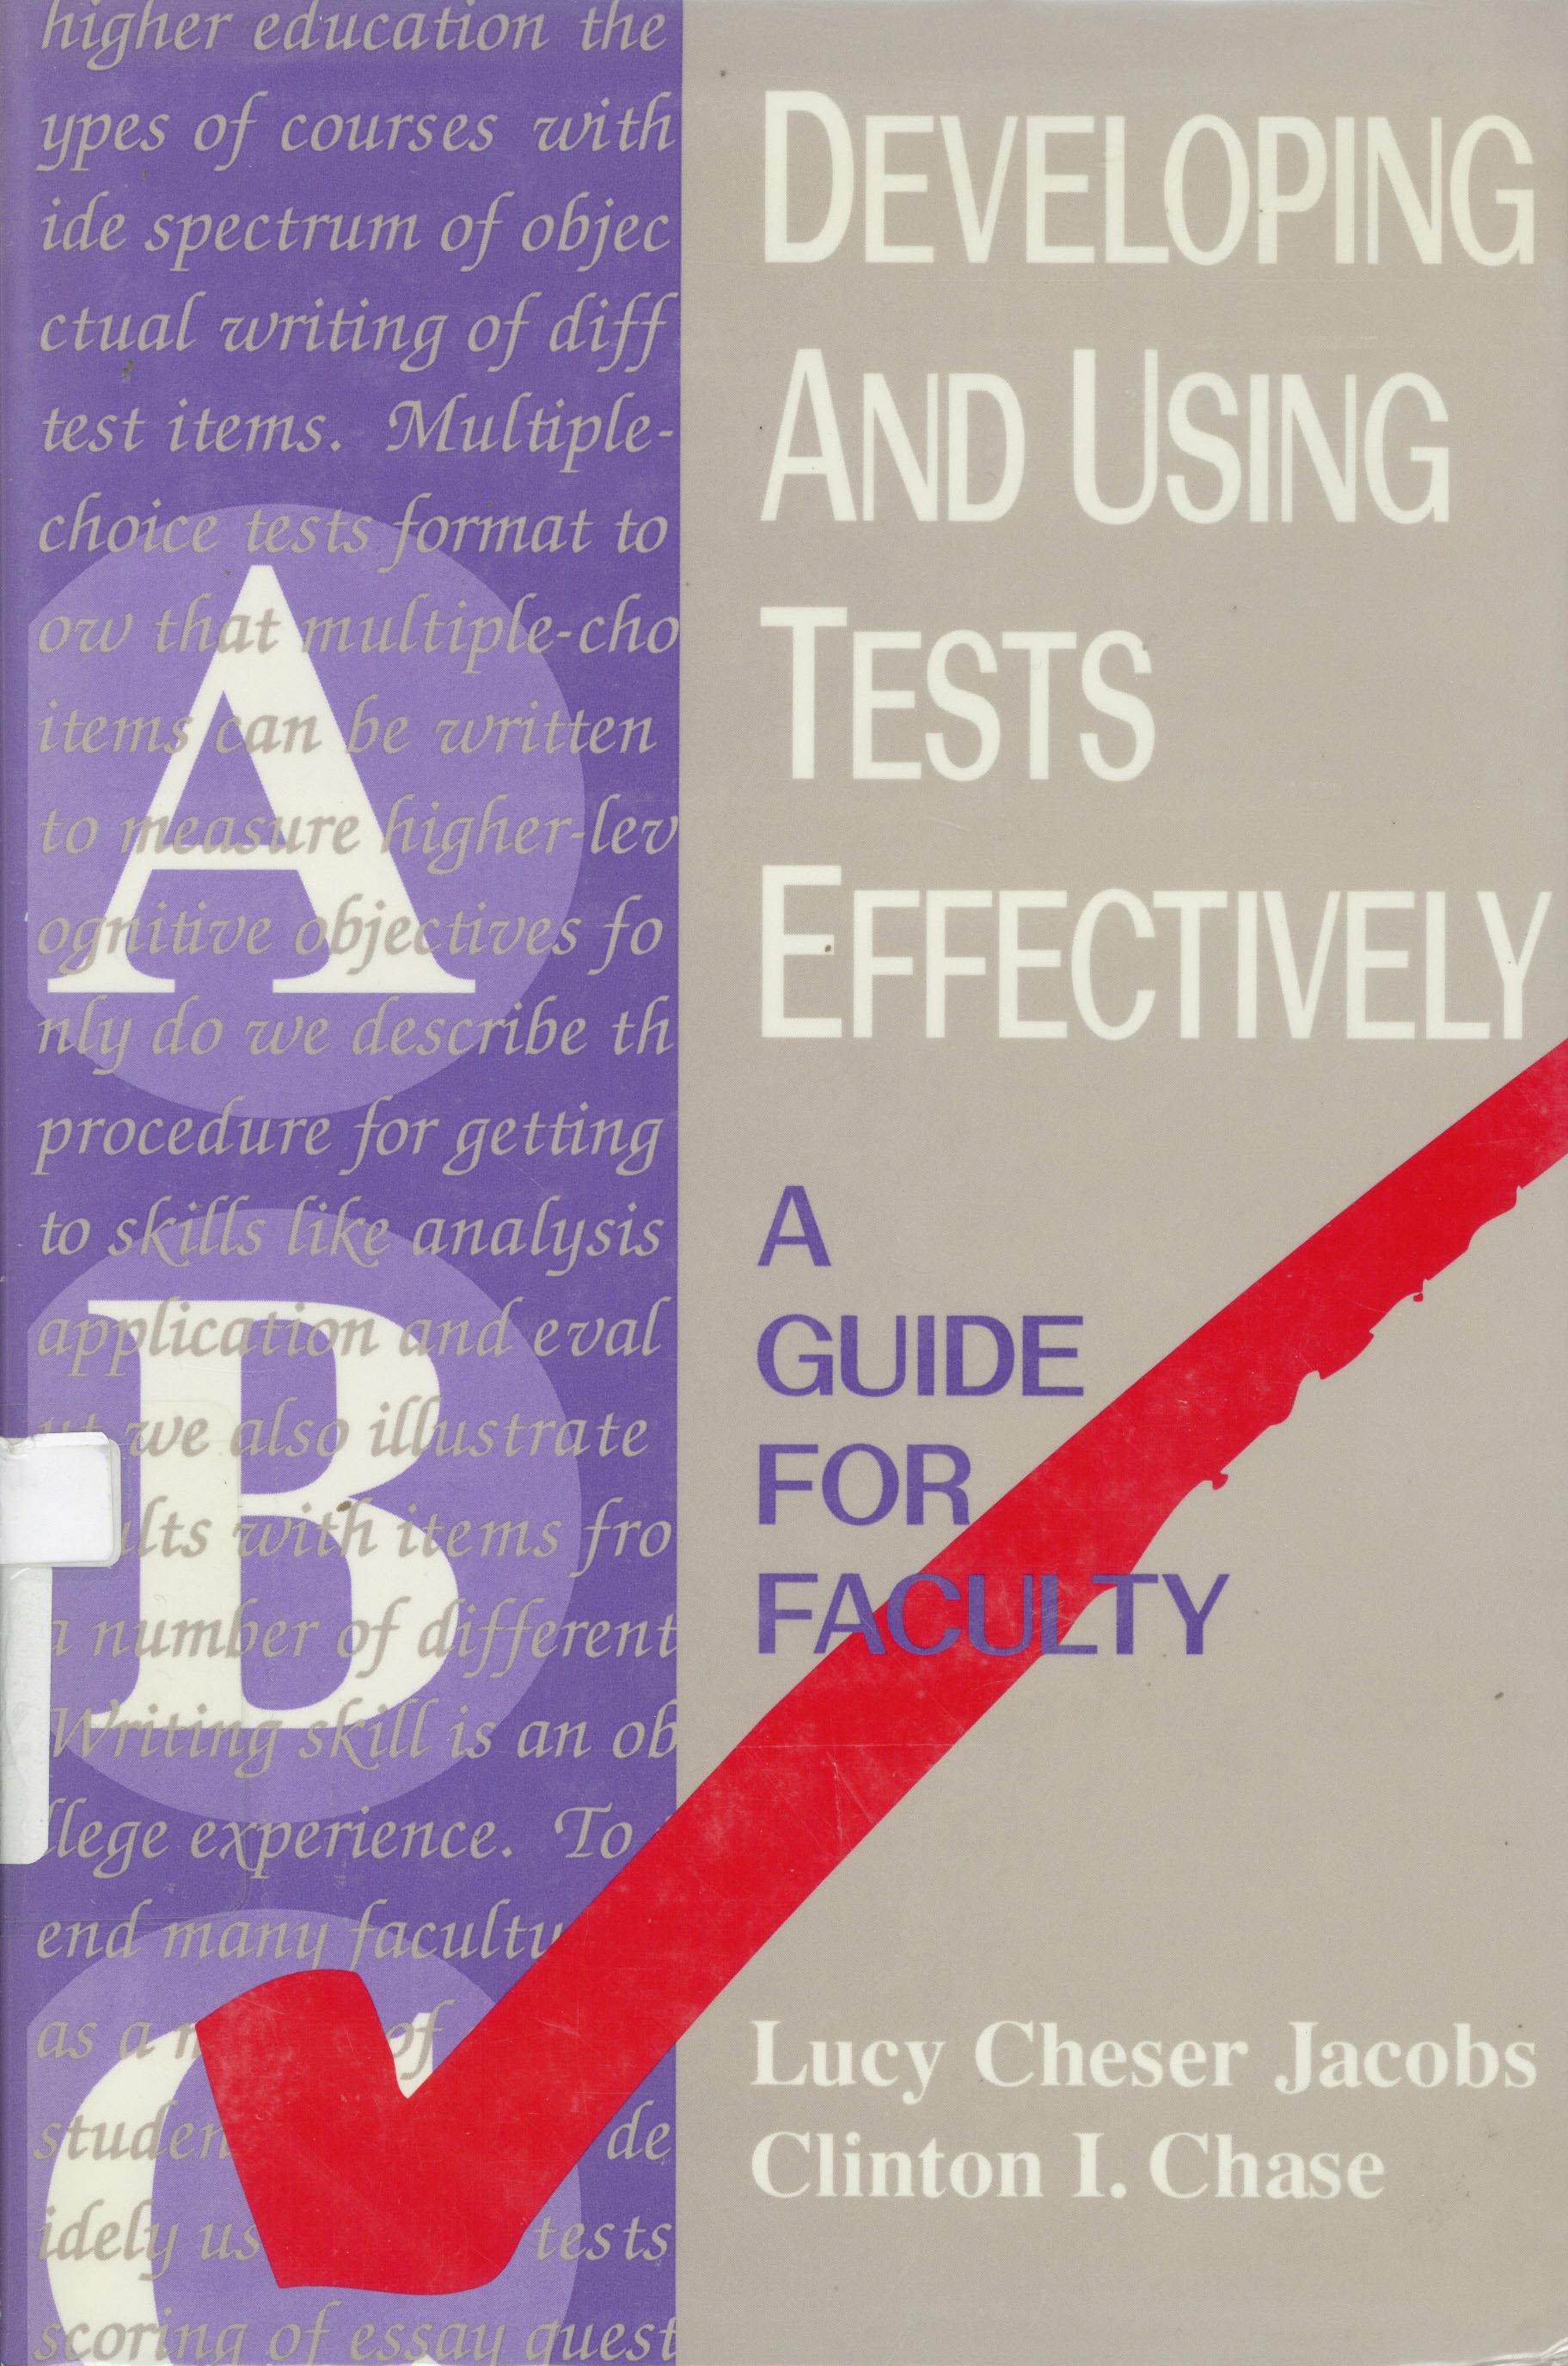 Developing and using tests effectively : a guide for  faculty